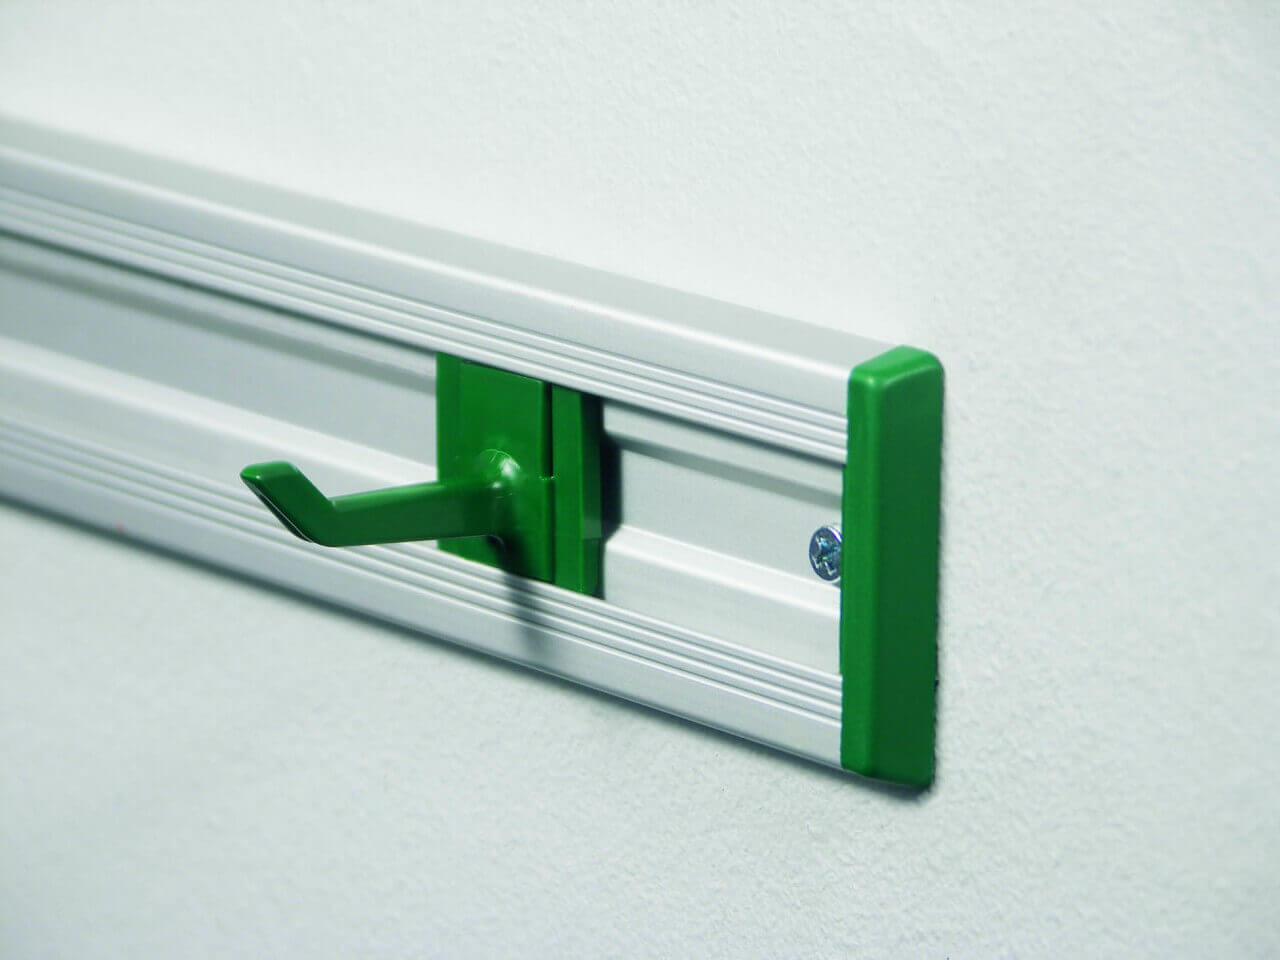 The hooks in the aluminum frame can be moved